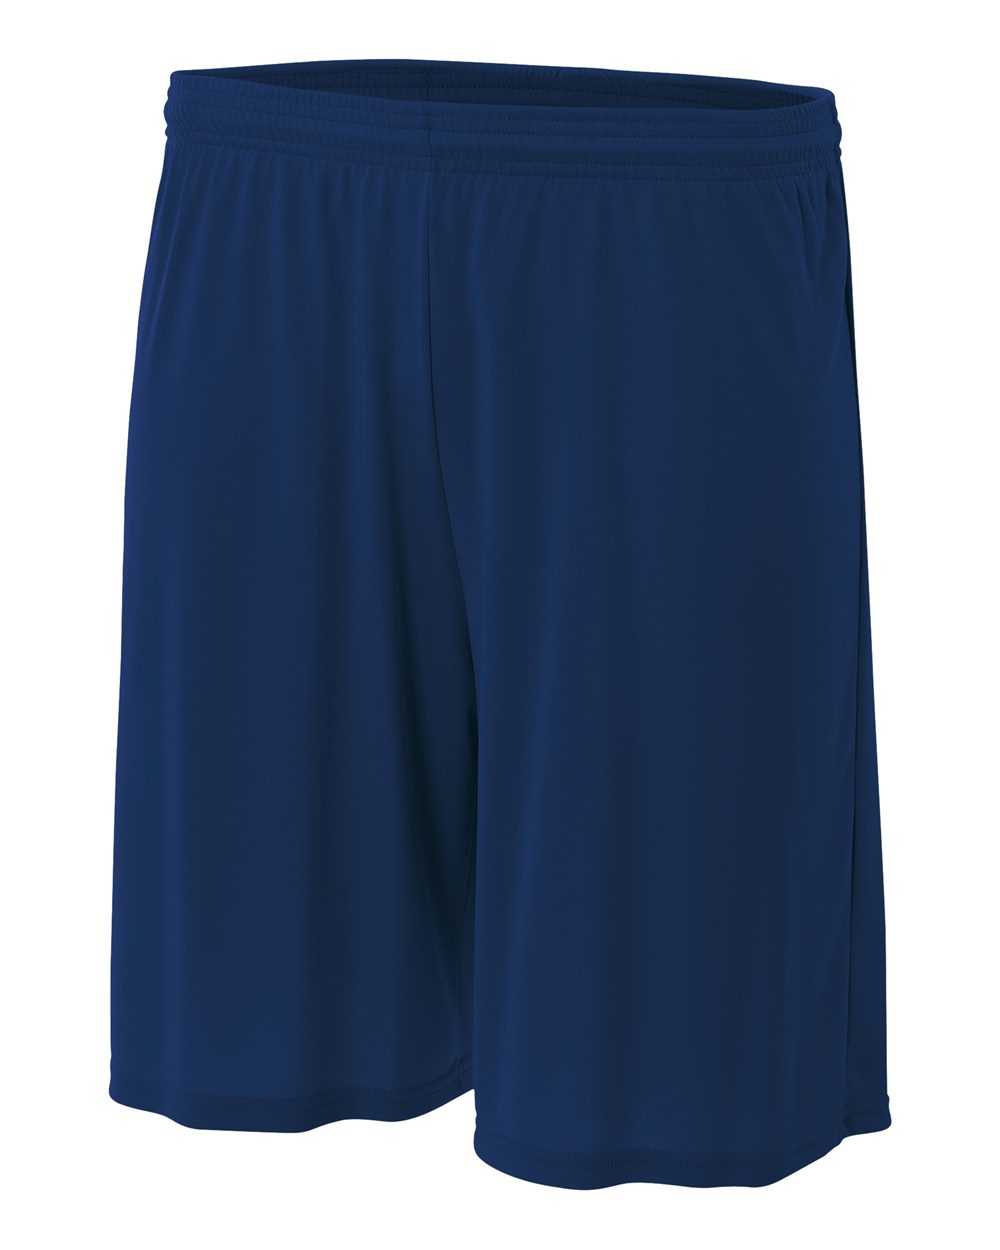 A4 N5283 9" Cooling Performance Short - Navy - HIT a Double